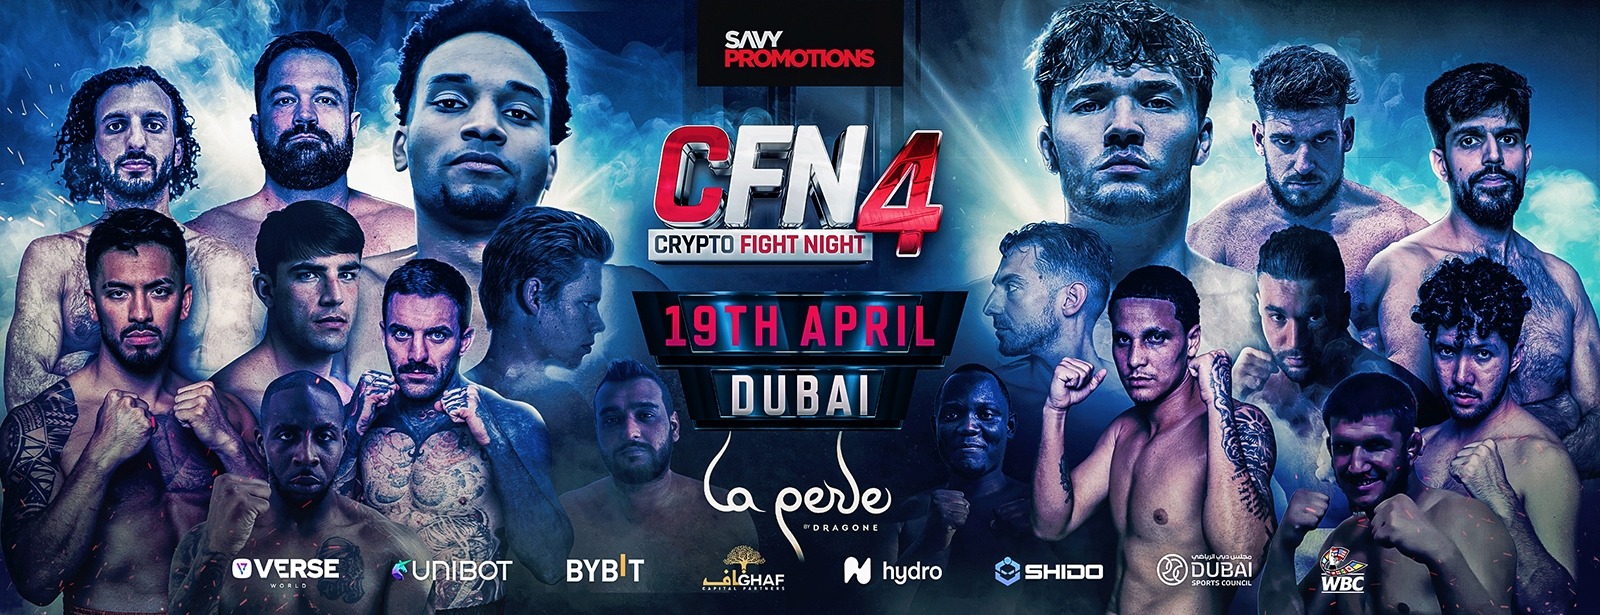 Crypto Fight Night Event - Coming Soon in UAE